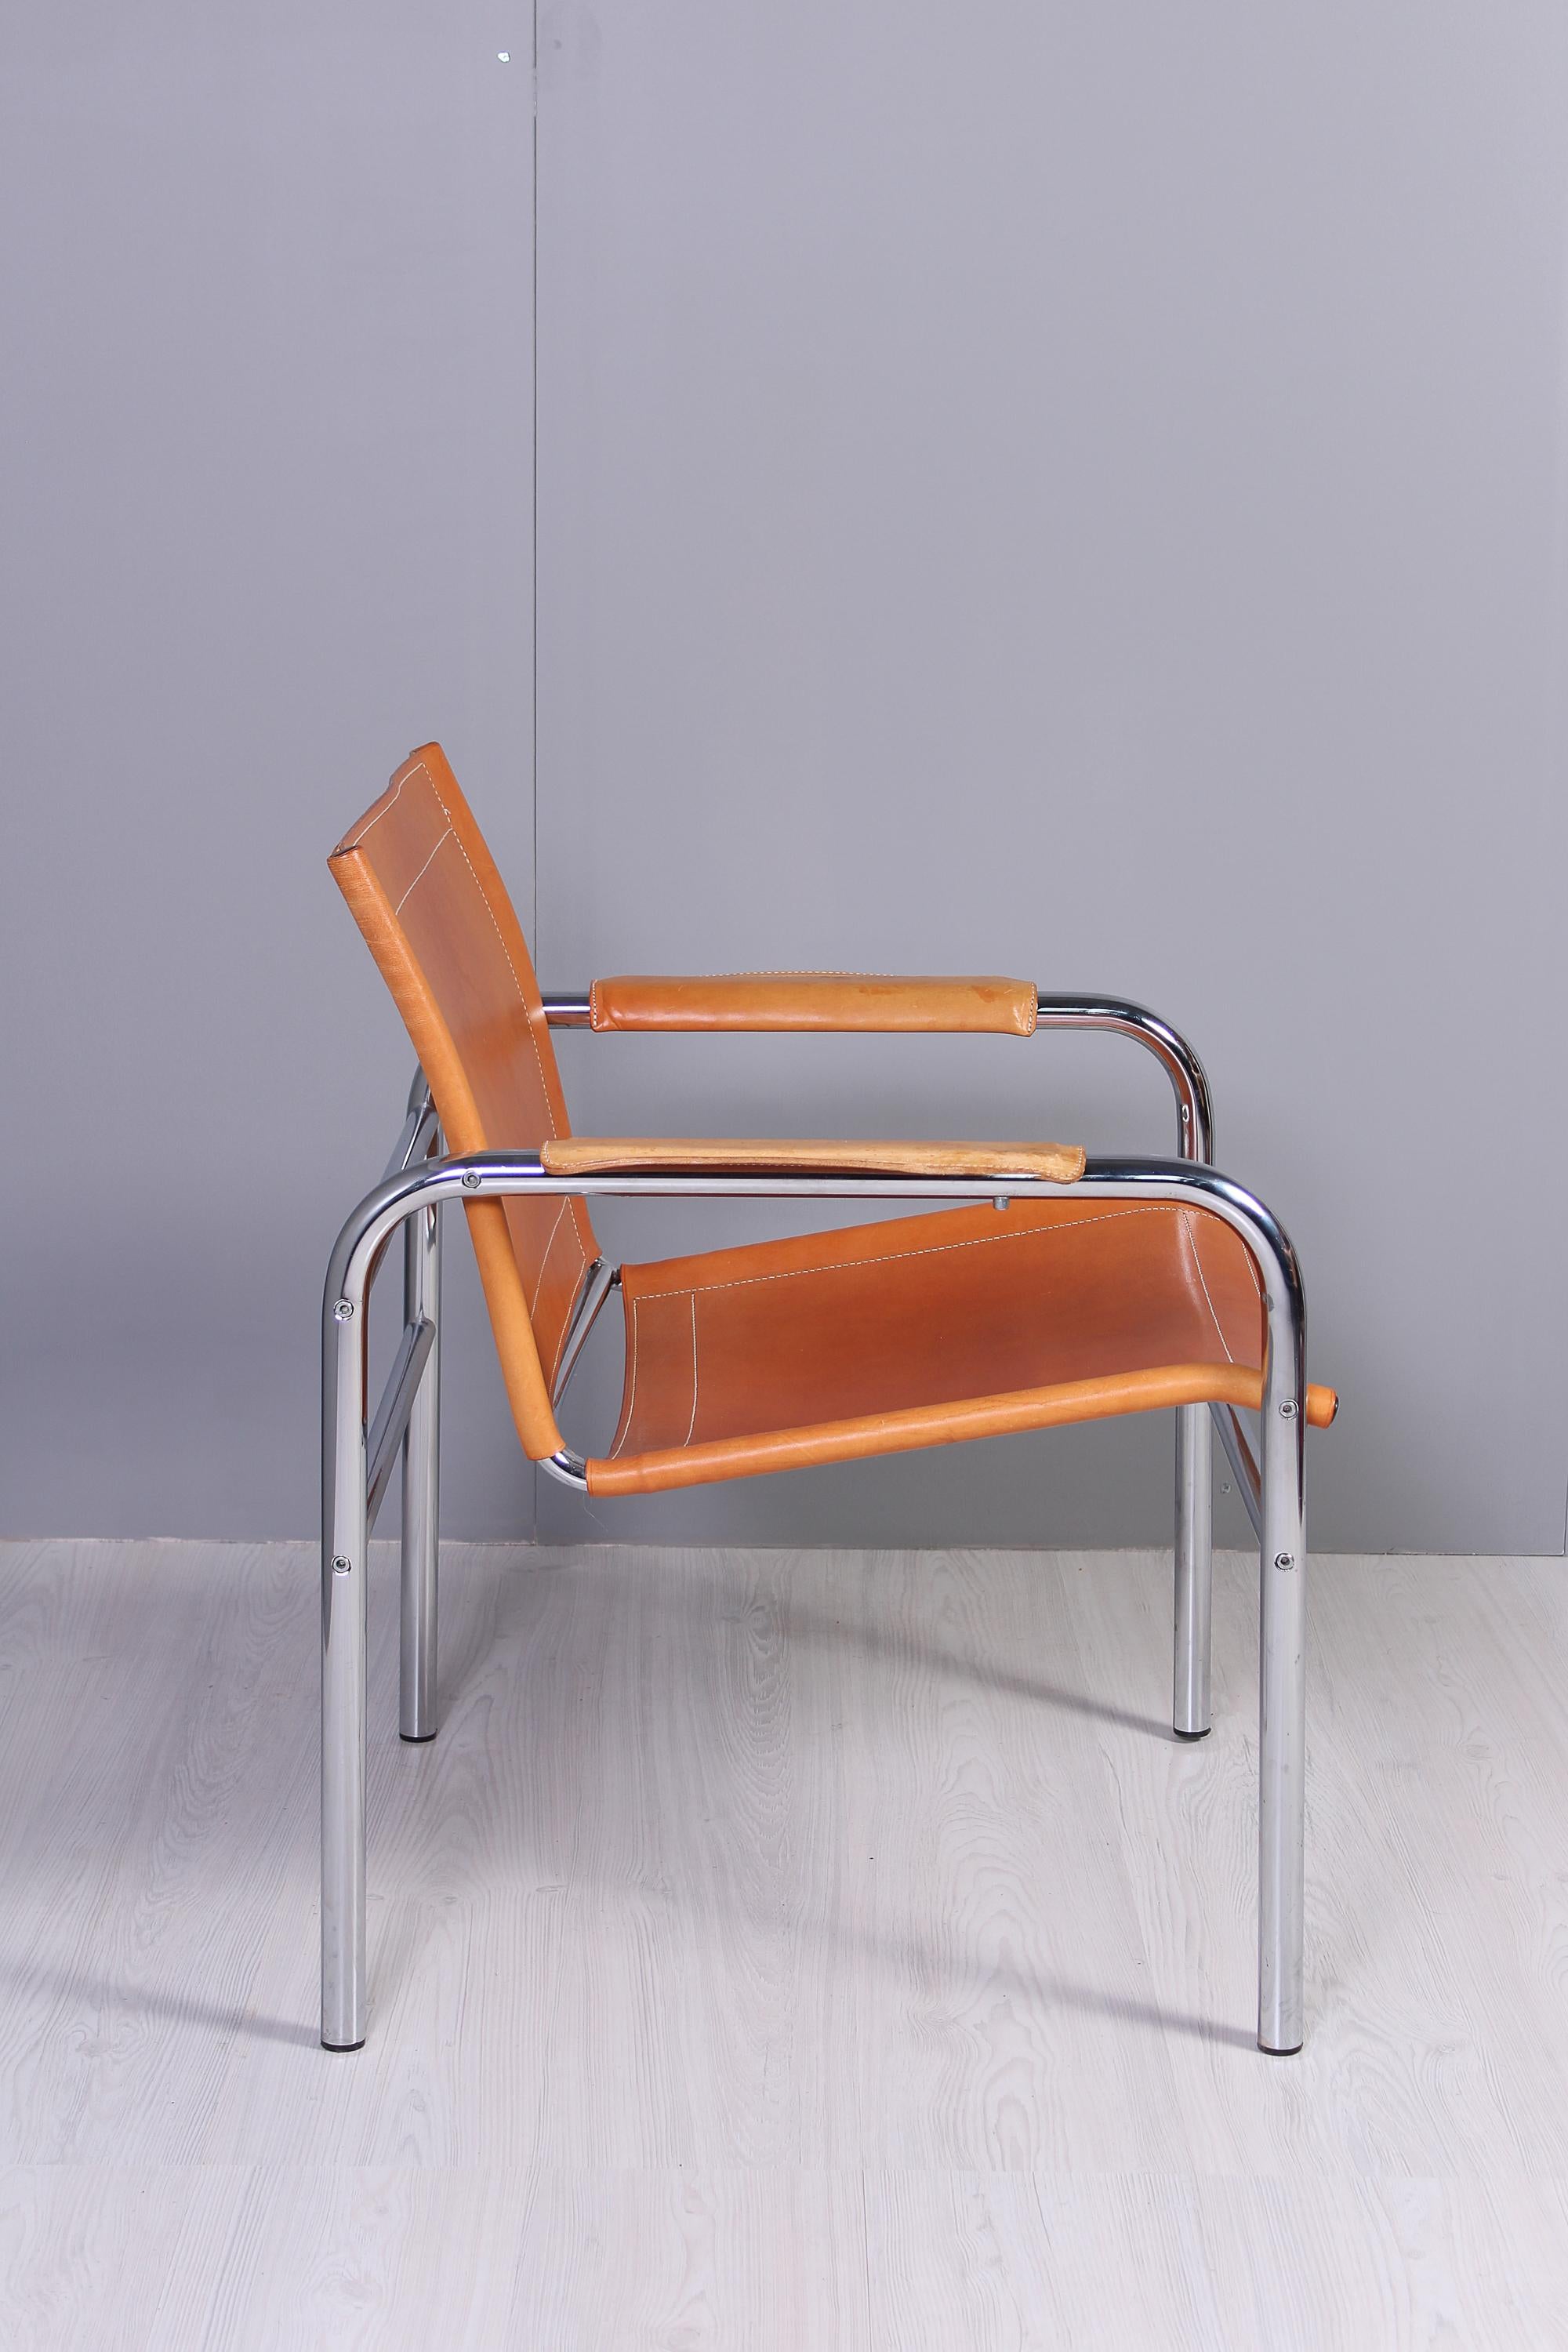 This chair is designed by Swedish designer Tord Björklund and was produced by Ikea in the 1970s. The chair has a thick cognac brown leather upholstery and a chrome steel frame. The leather is in excellent vintage condition with just the right amount